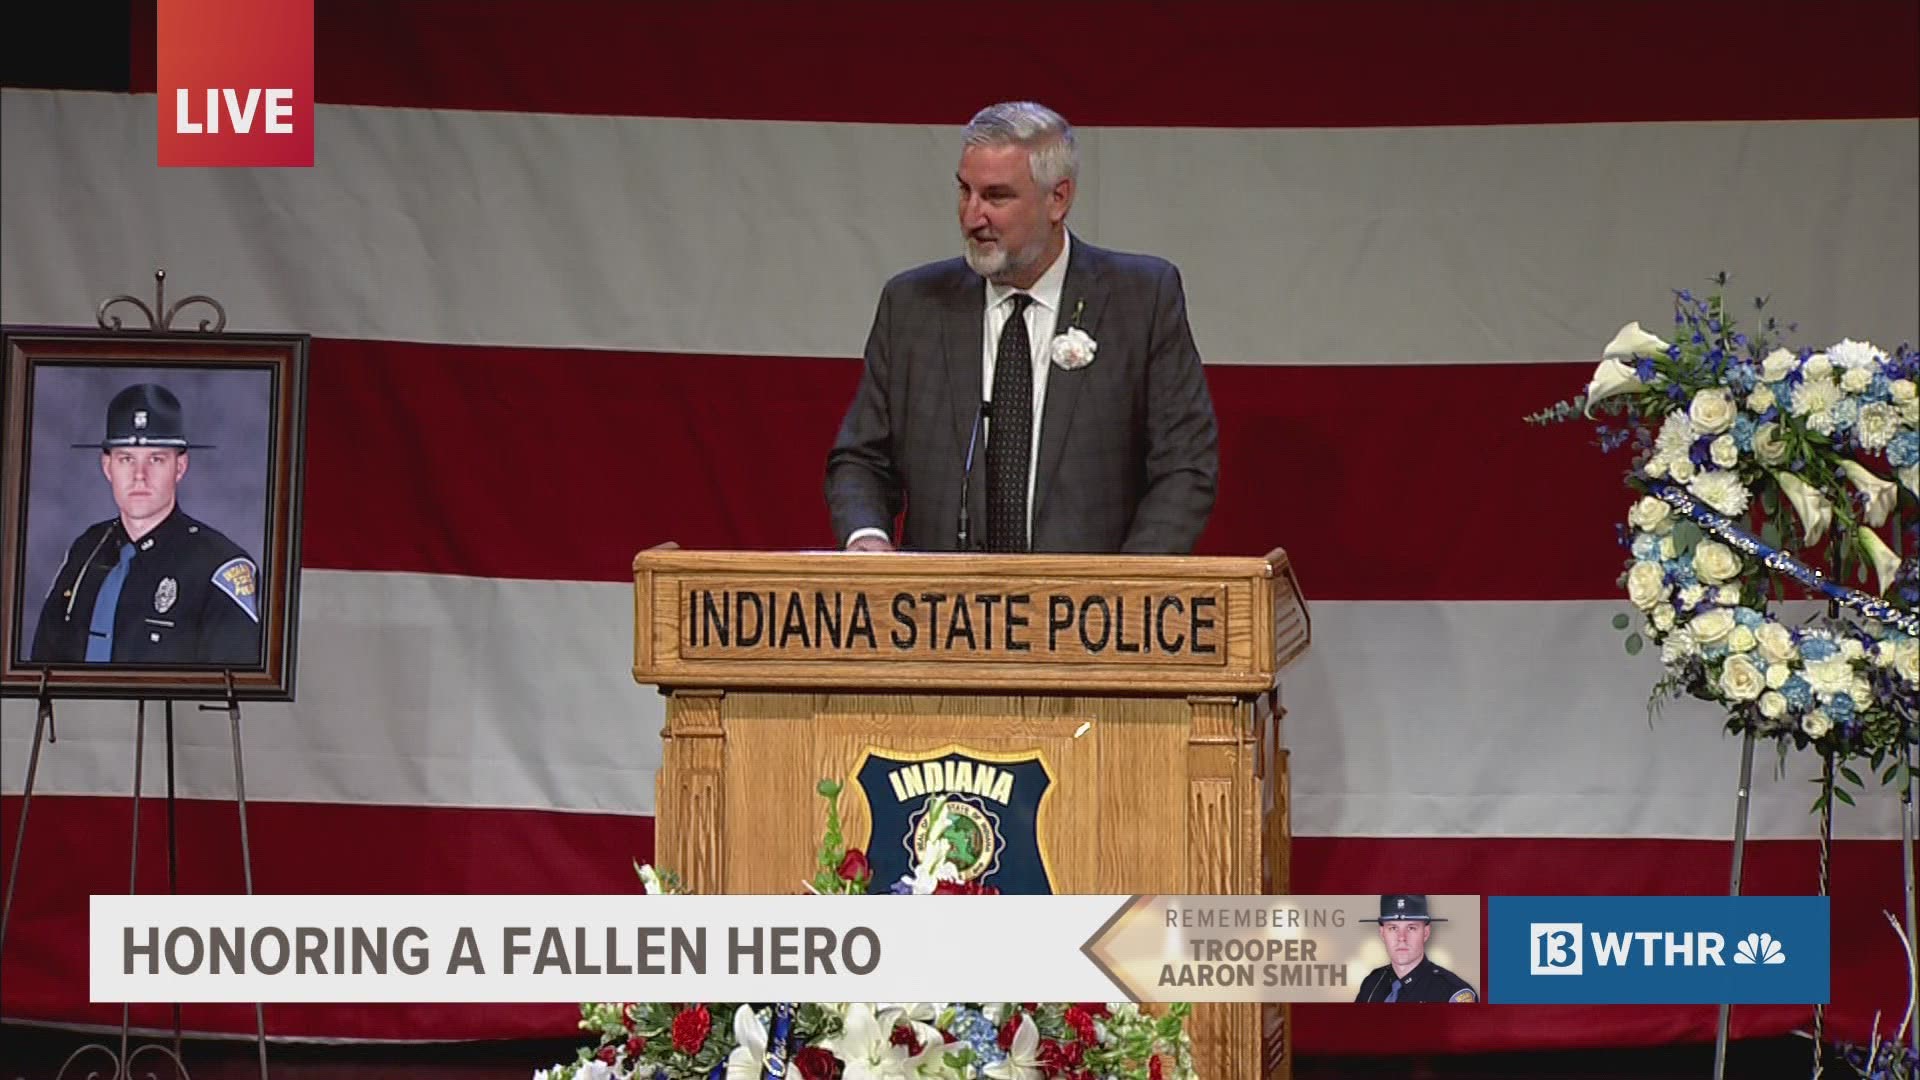 "I plead that we never take for granted the kind of humble Hoosier heroism Aaron displayed, not just that day.... time and time again," Holcomb said.